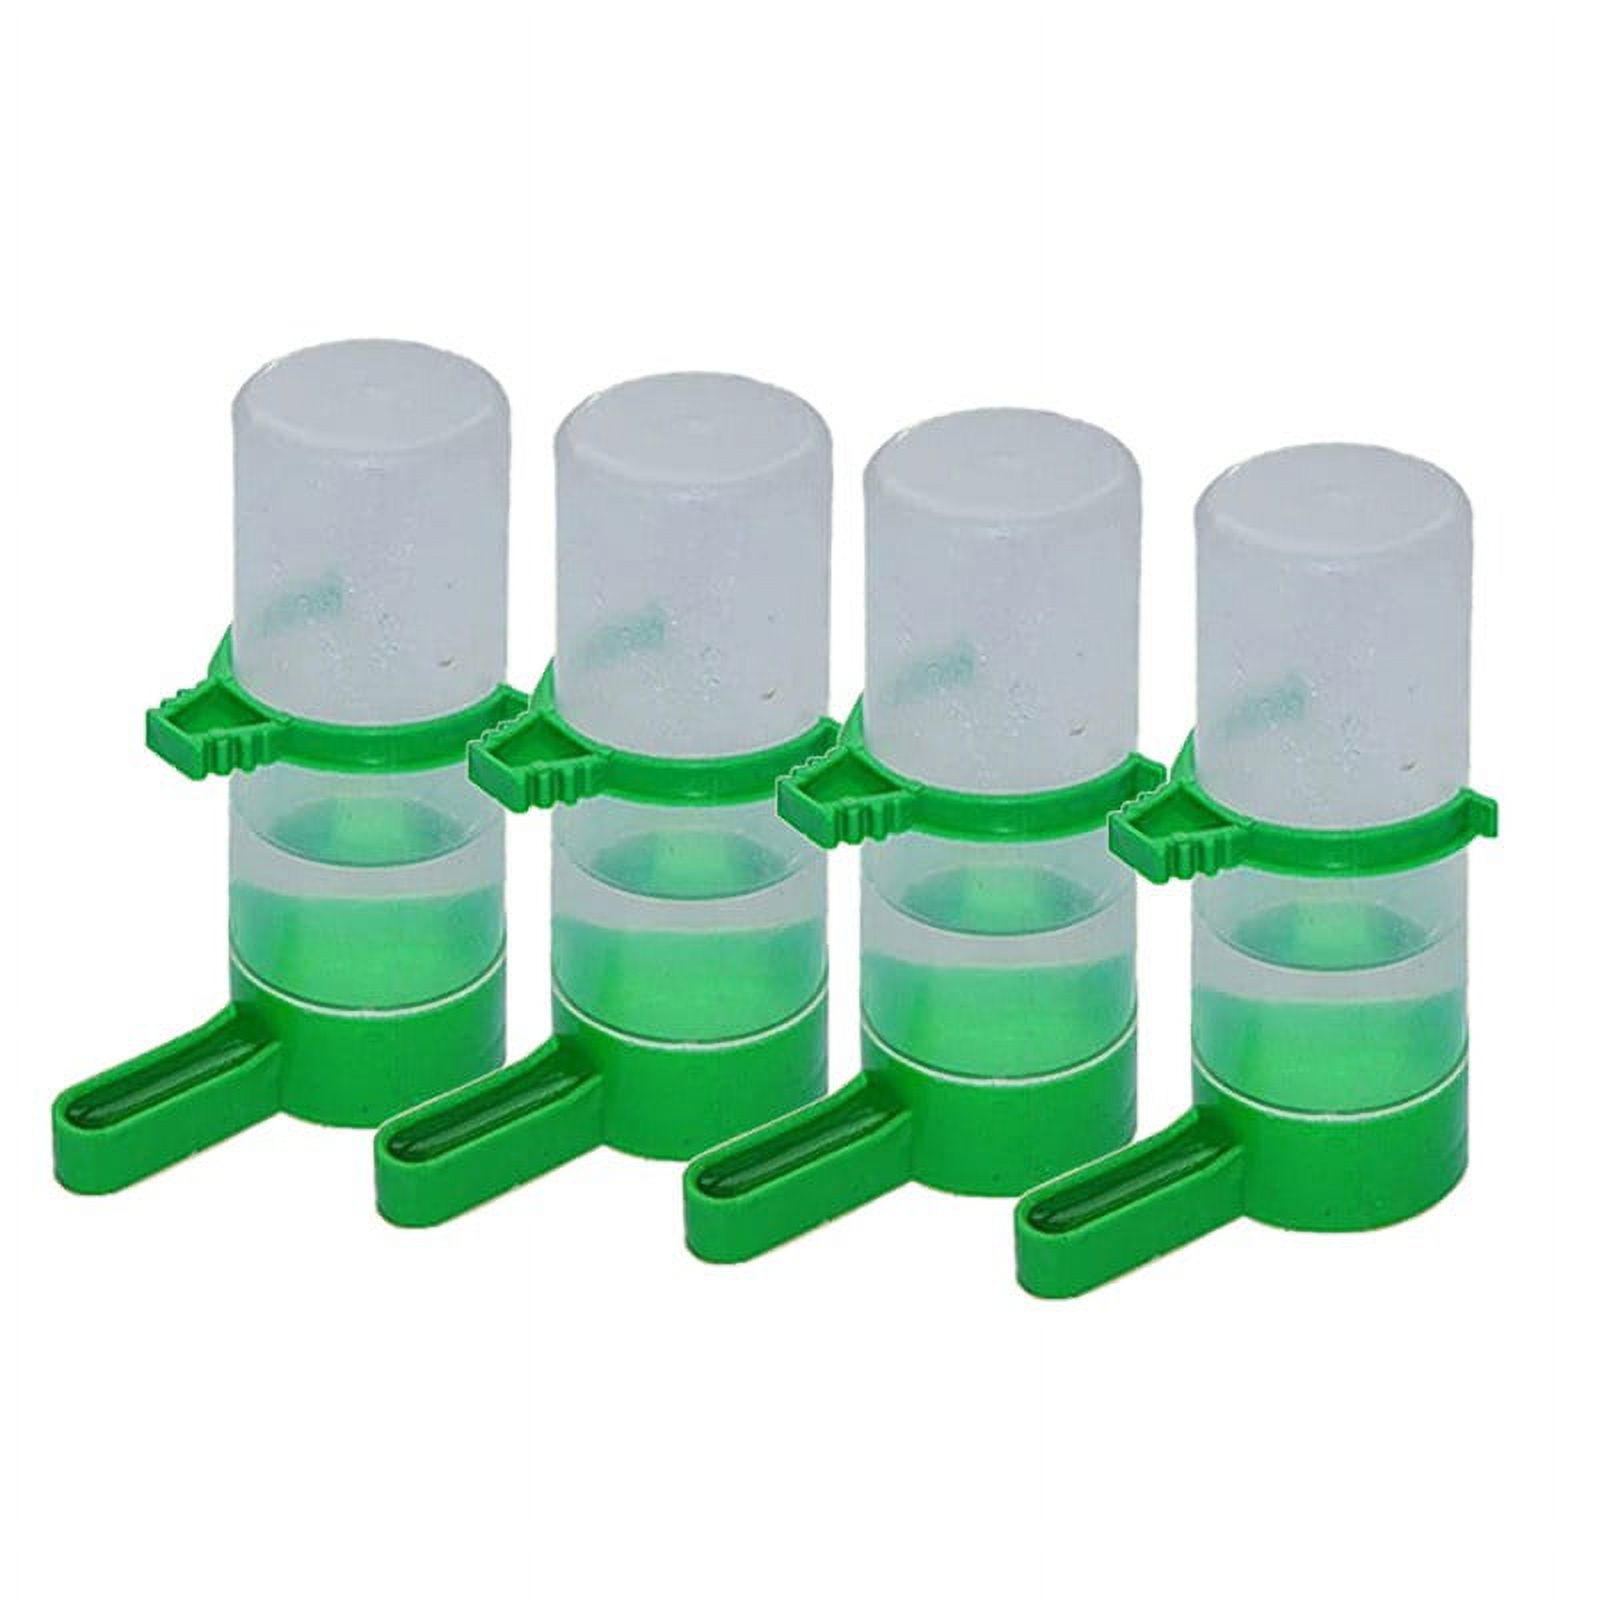 4PCS Plastic Pet Bird Drinker Feeder Water Bottle Cup For Cage Budgie Birds - image 1 of 5